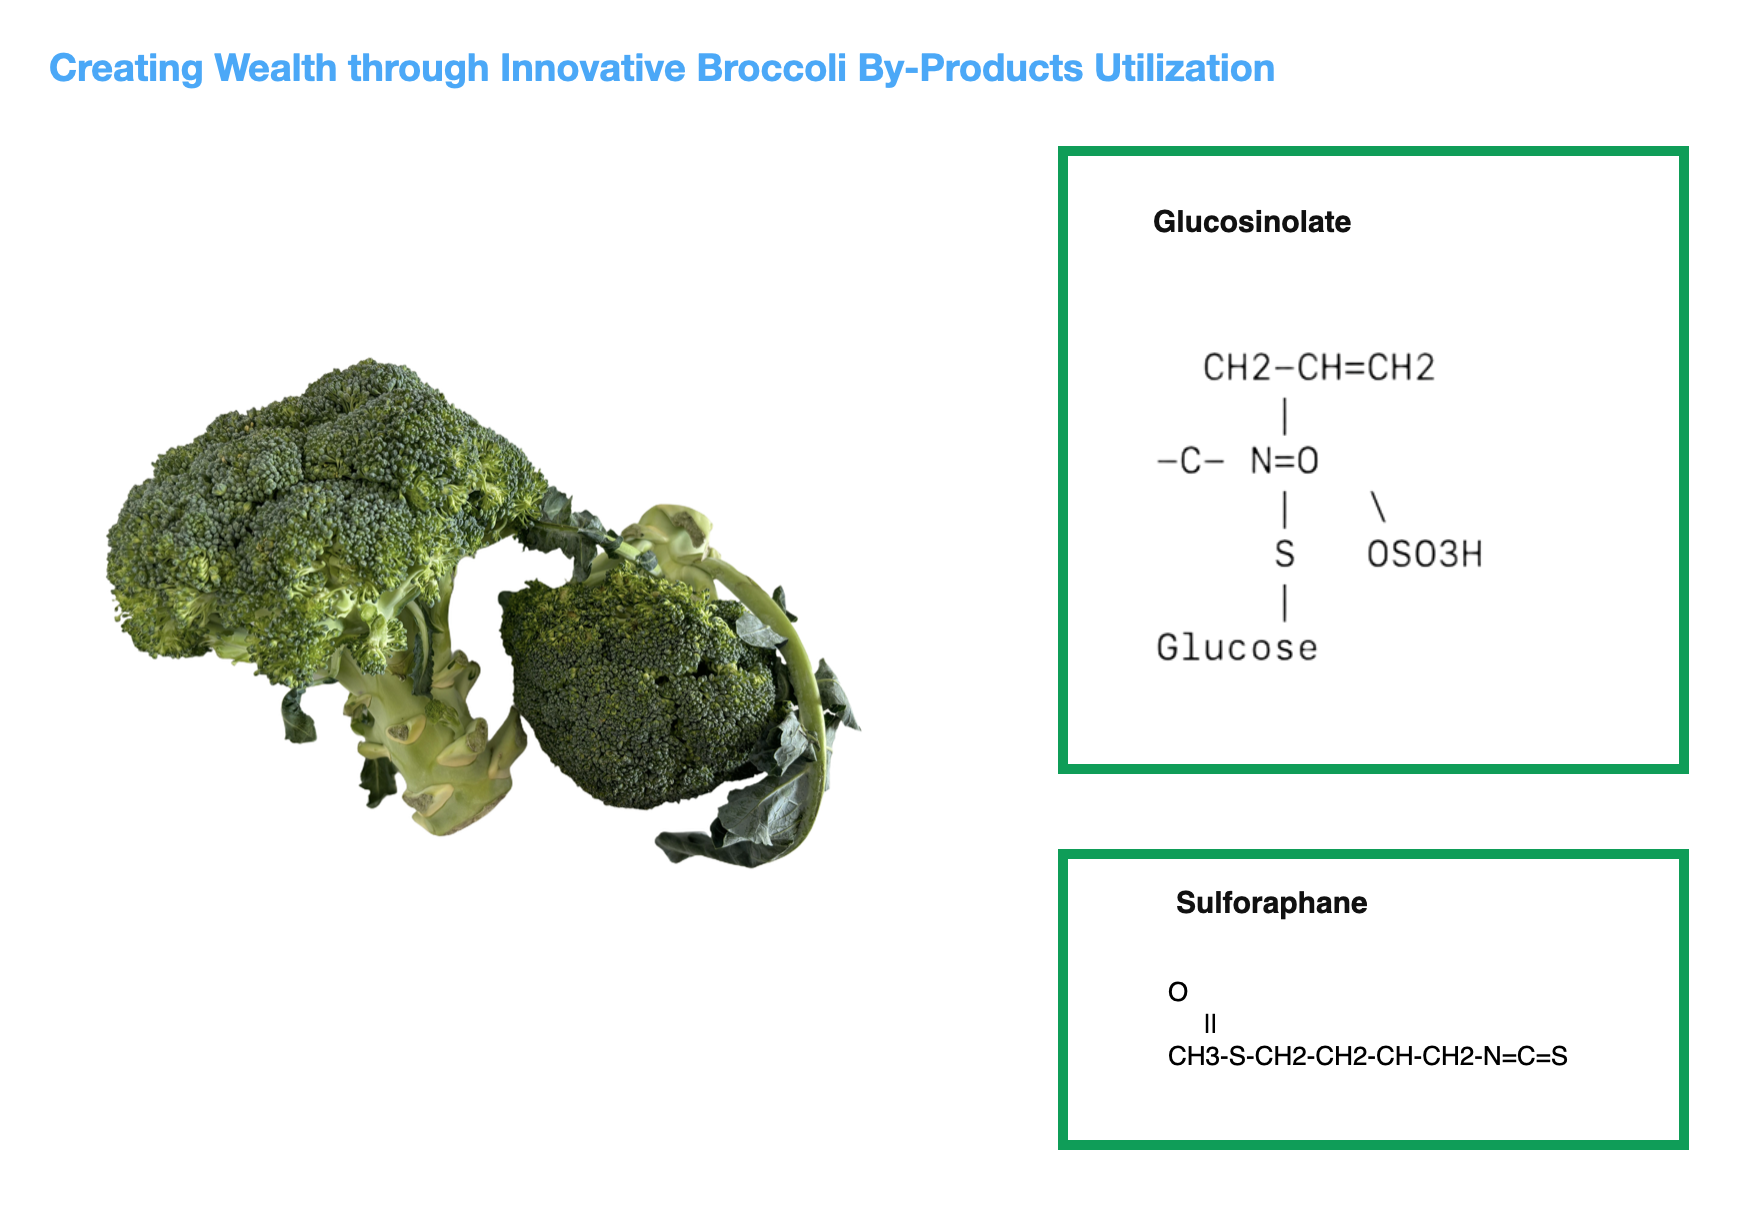 Creating Wealth through Innovative Broccoli By-Products Utilization